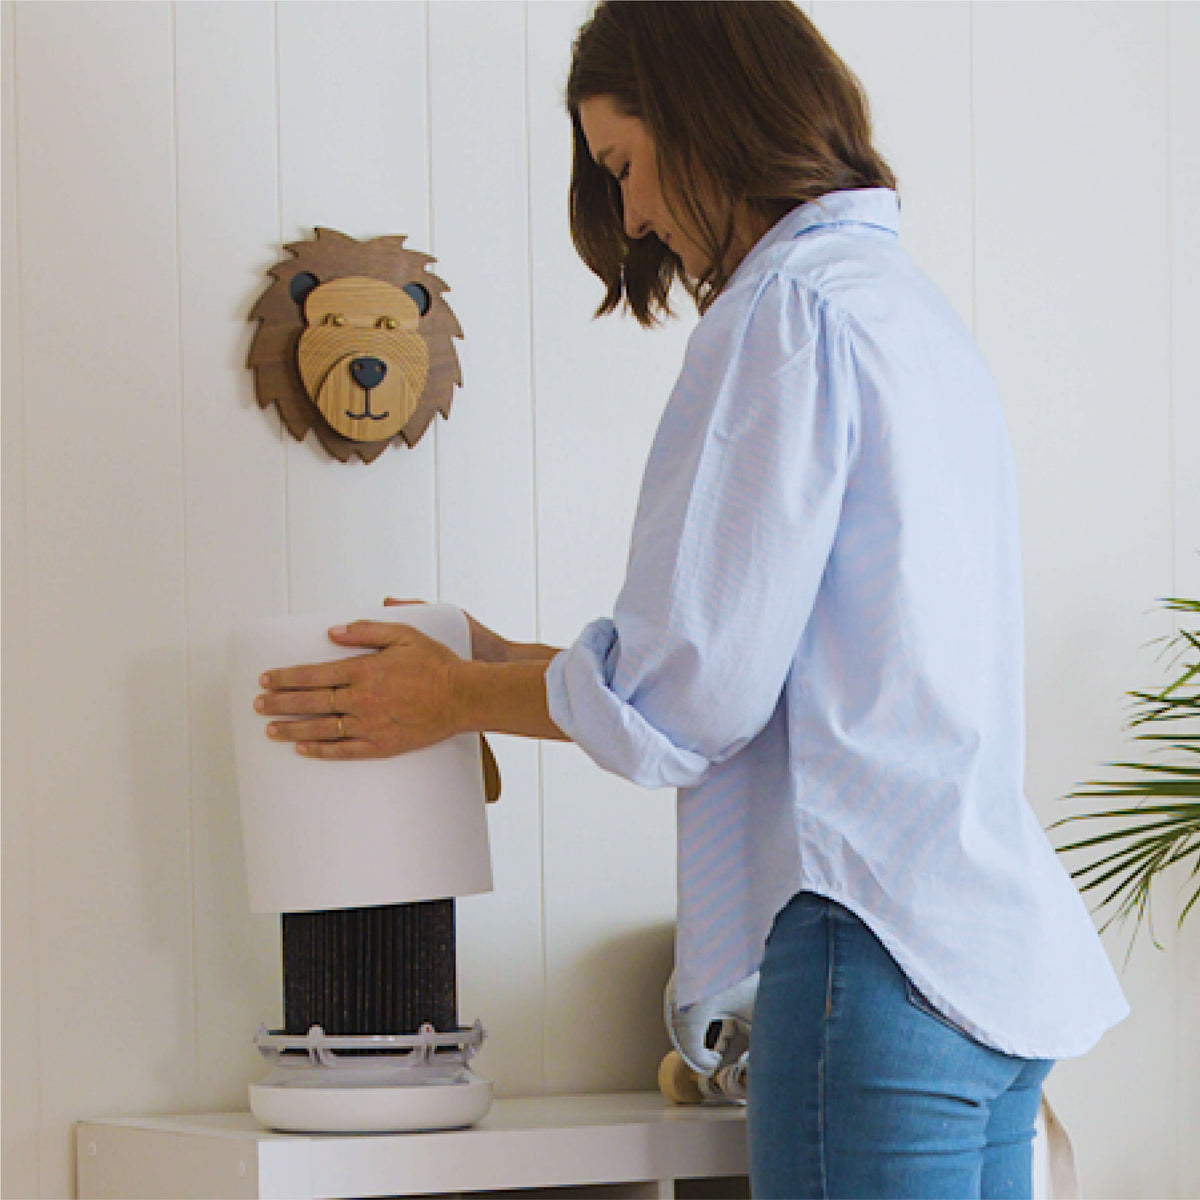 Woman removing the top of Air Mini+ air purifier to change filter.